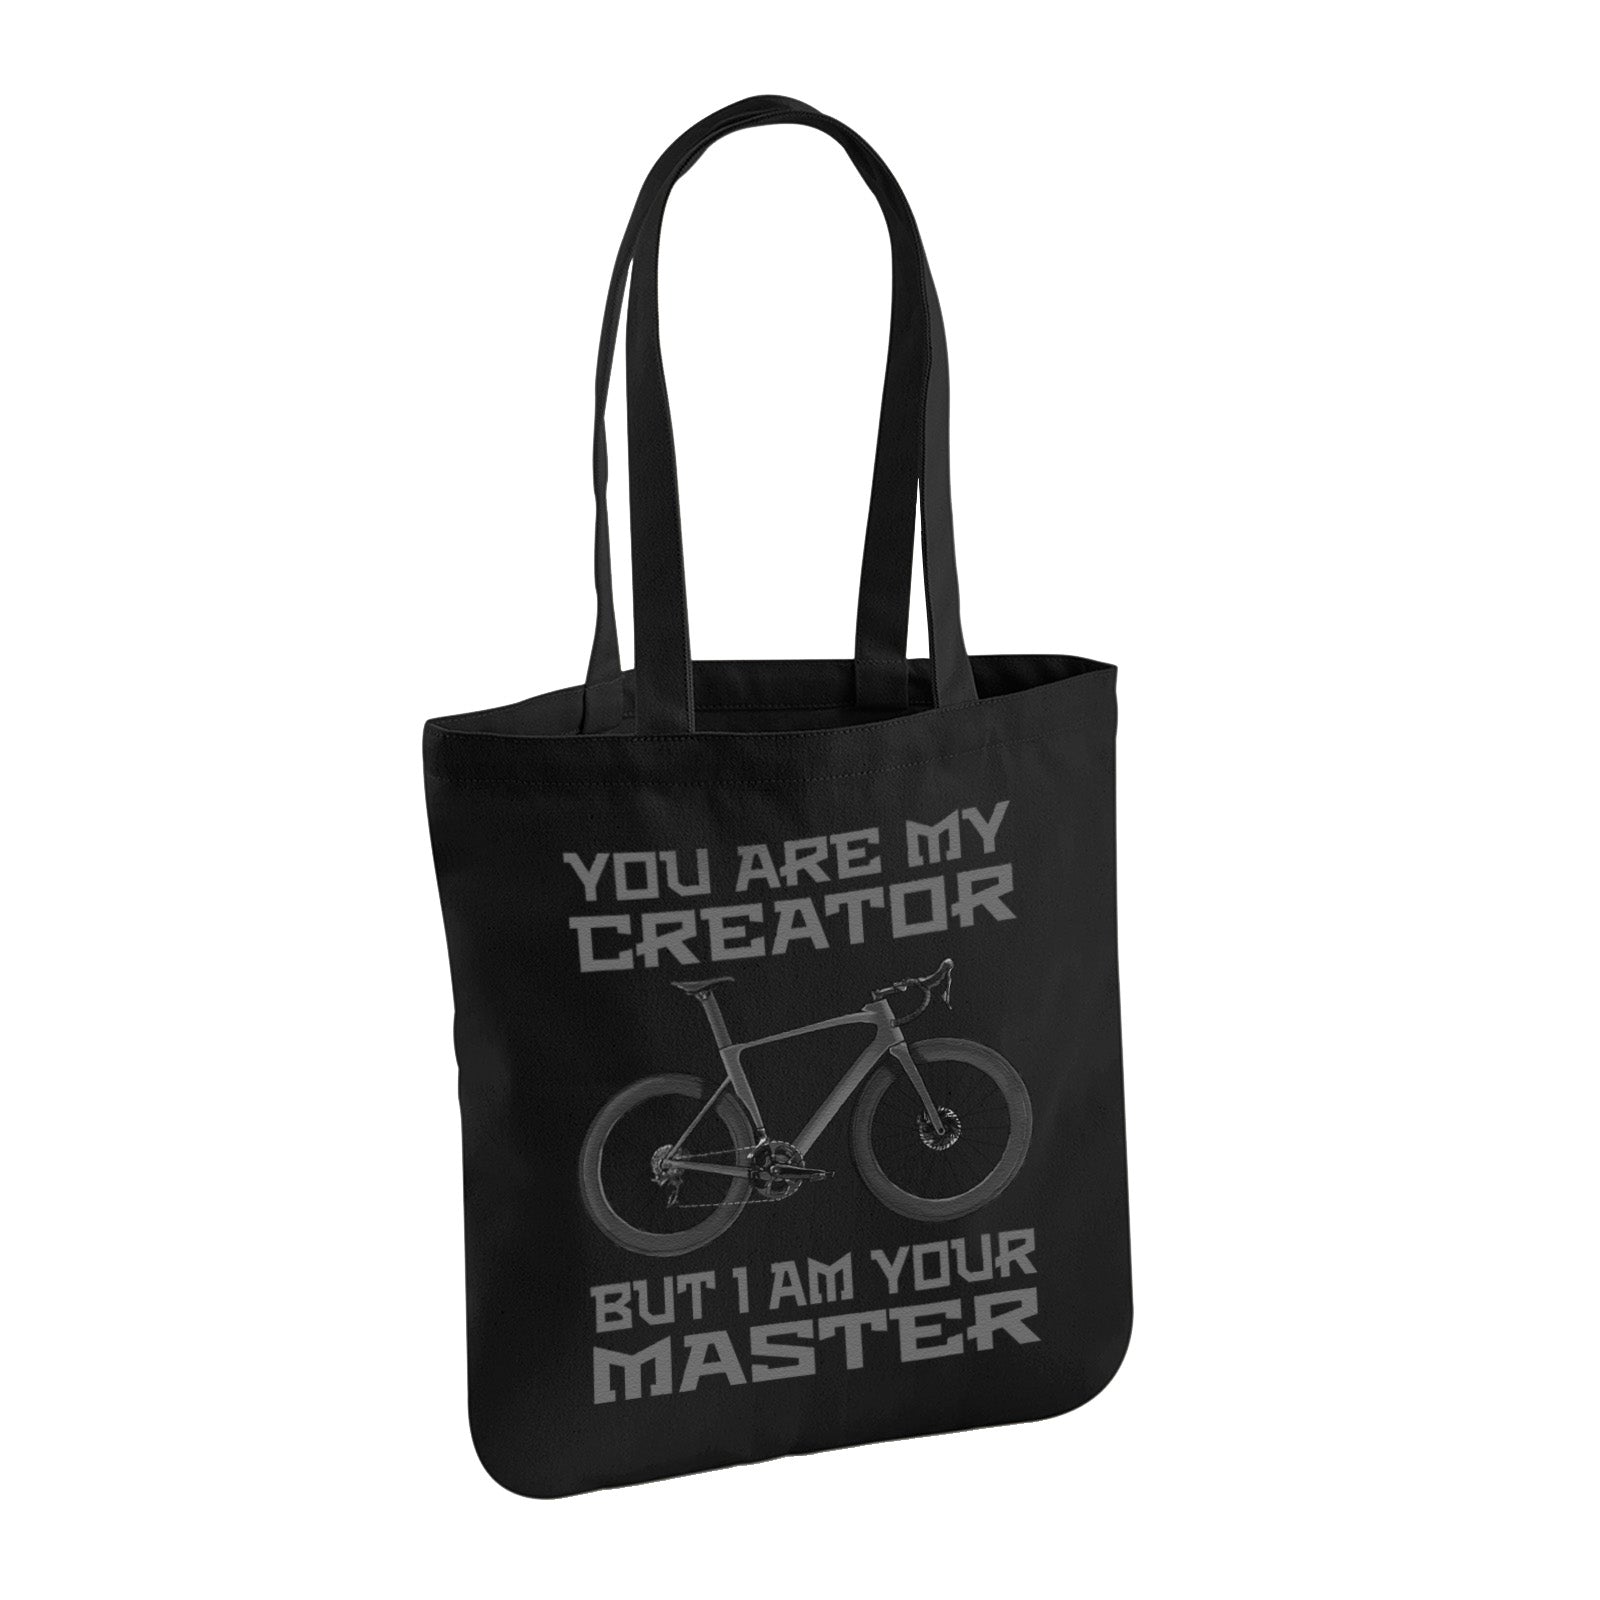 You Are my Creator But I am Your Master 100% Organic Cotton Black Tote